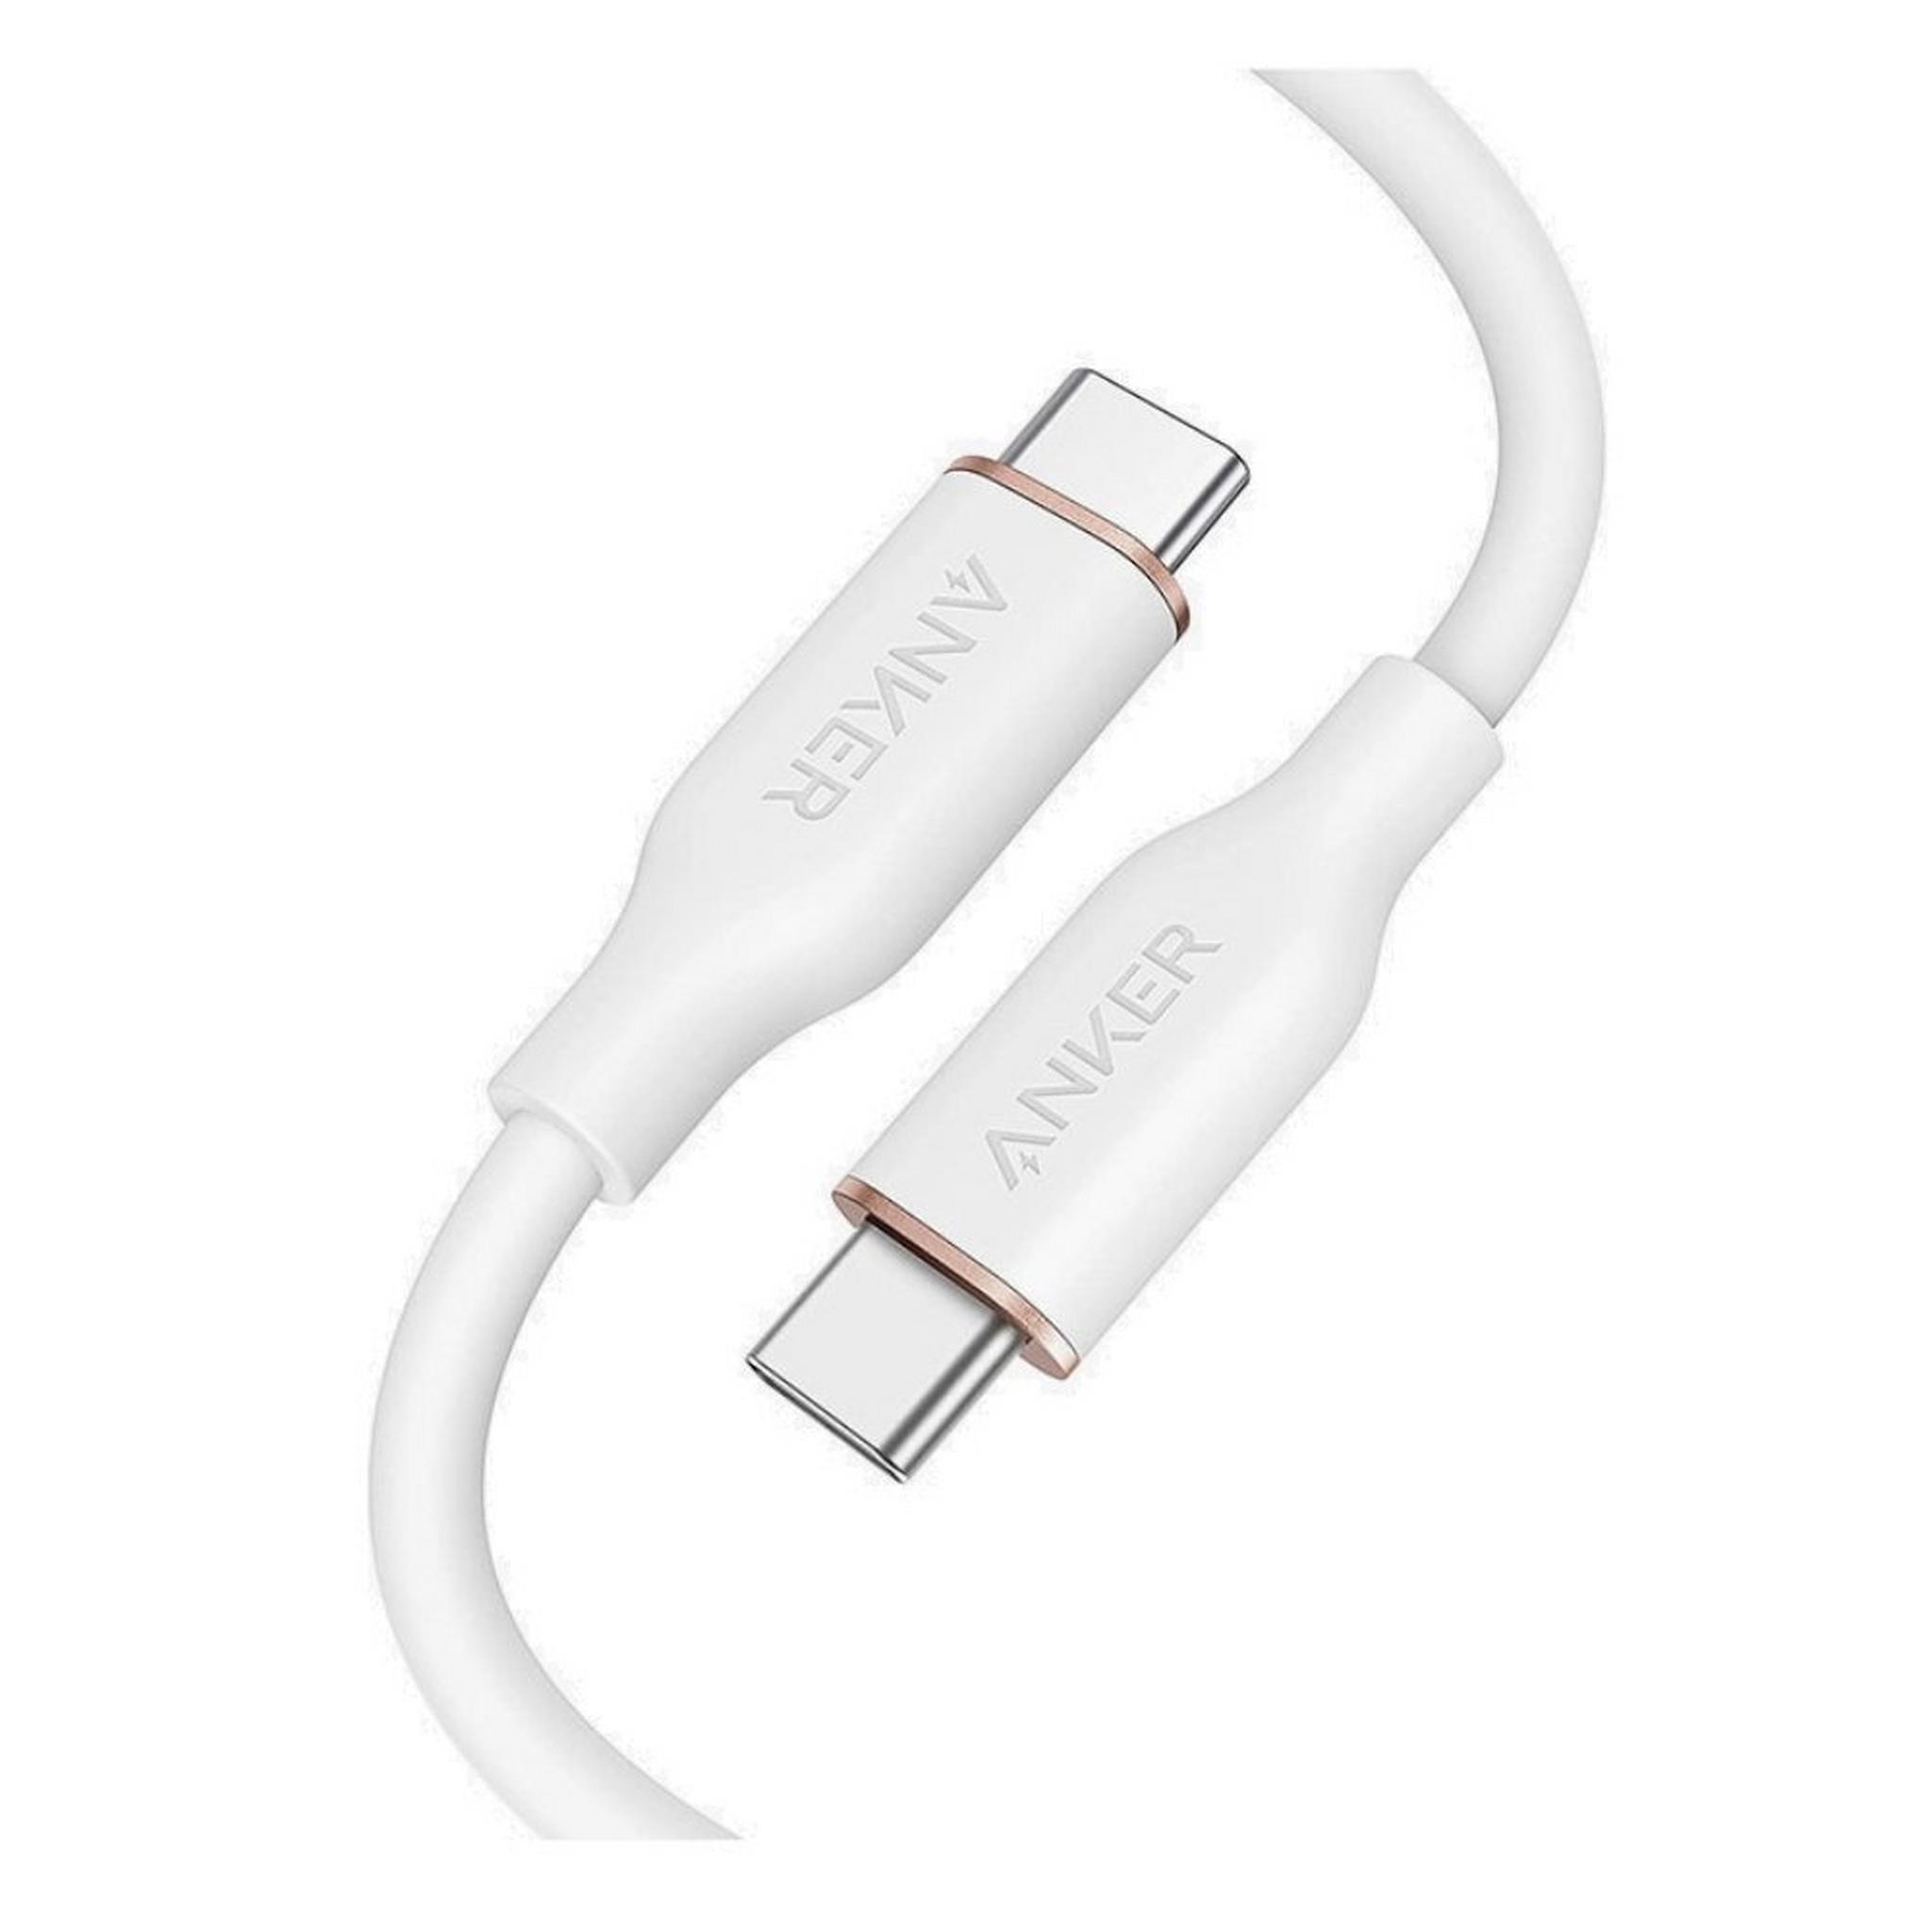 Anker PowerLine III Flow 100W USB-C to USB-C 6ft Cable - White